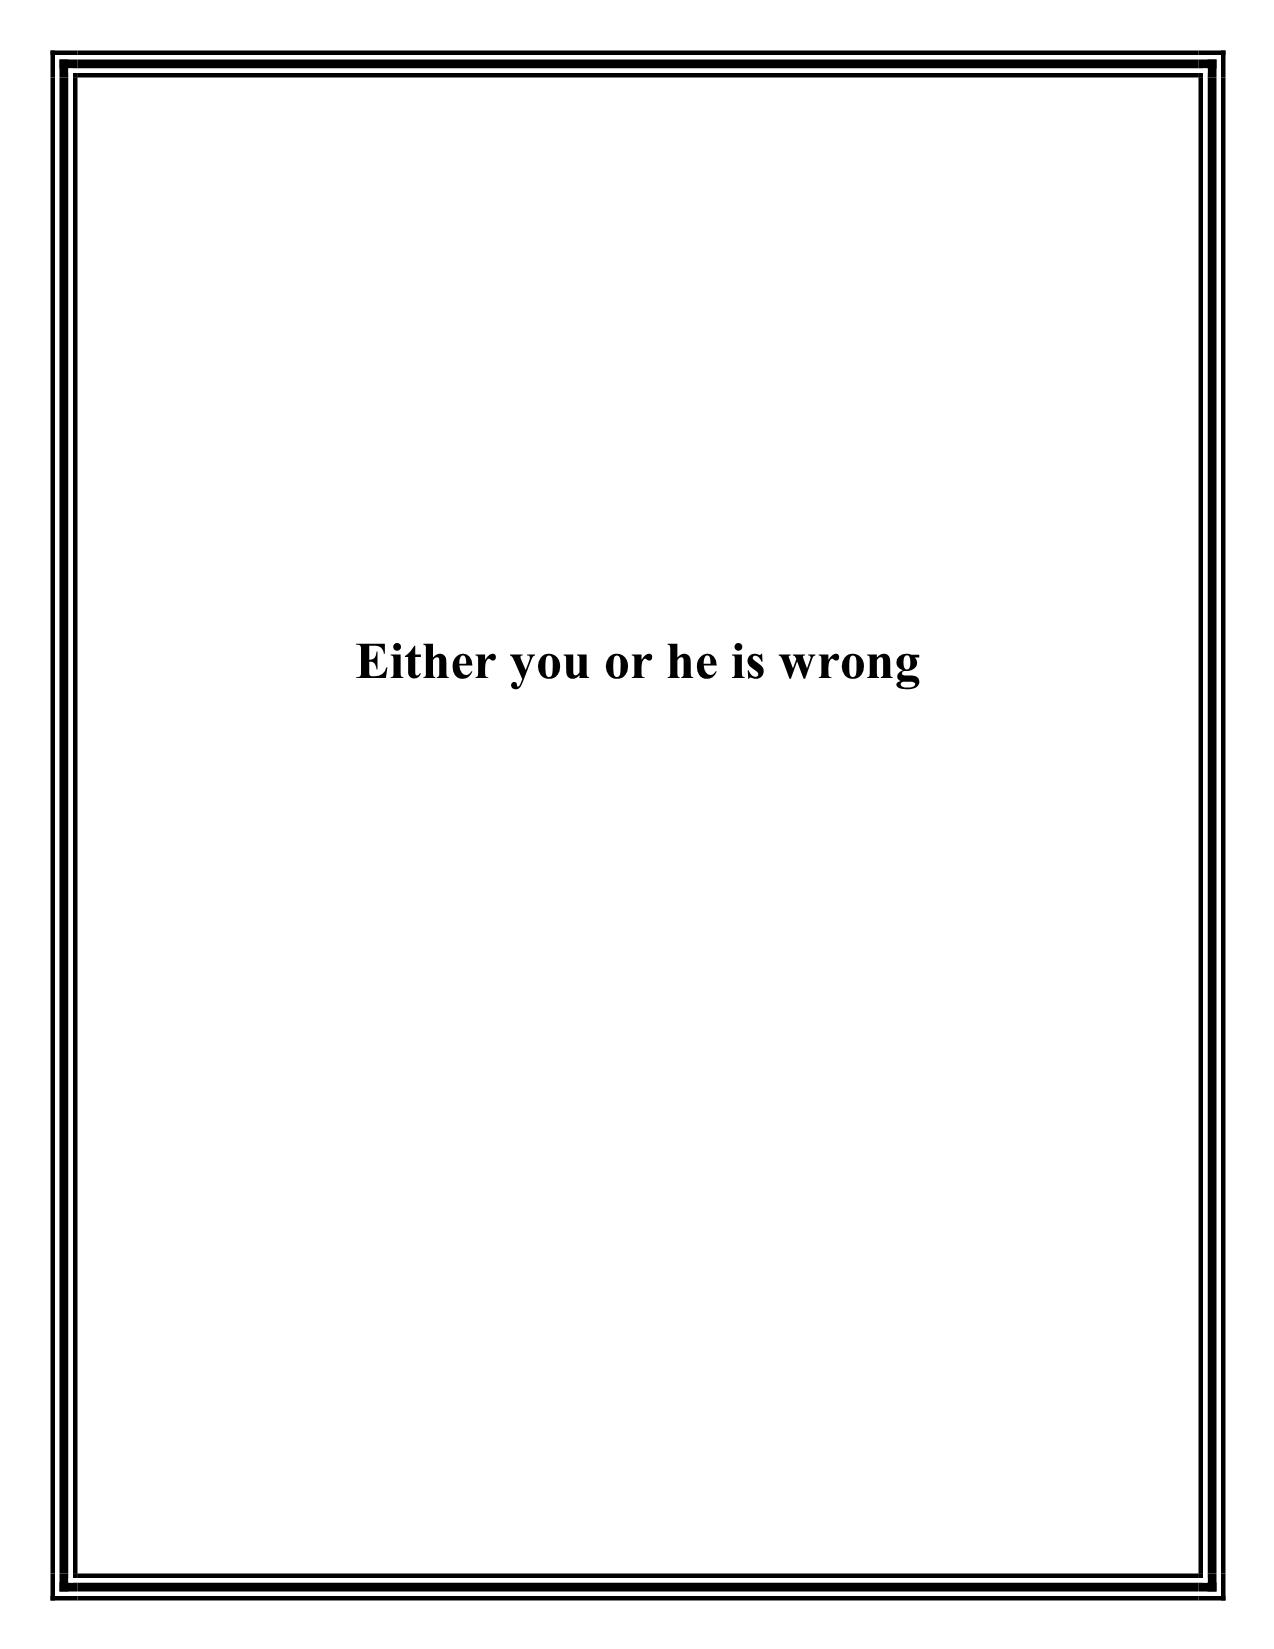 Either you or he is wrong trang 1